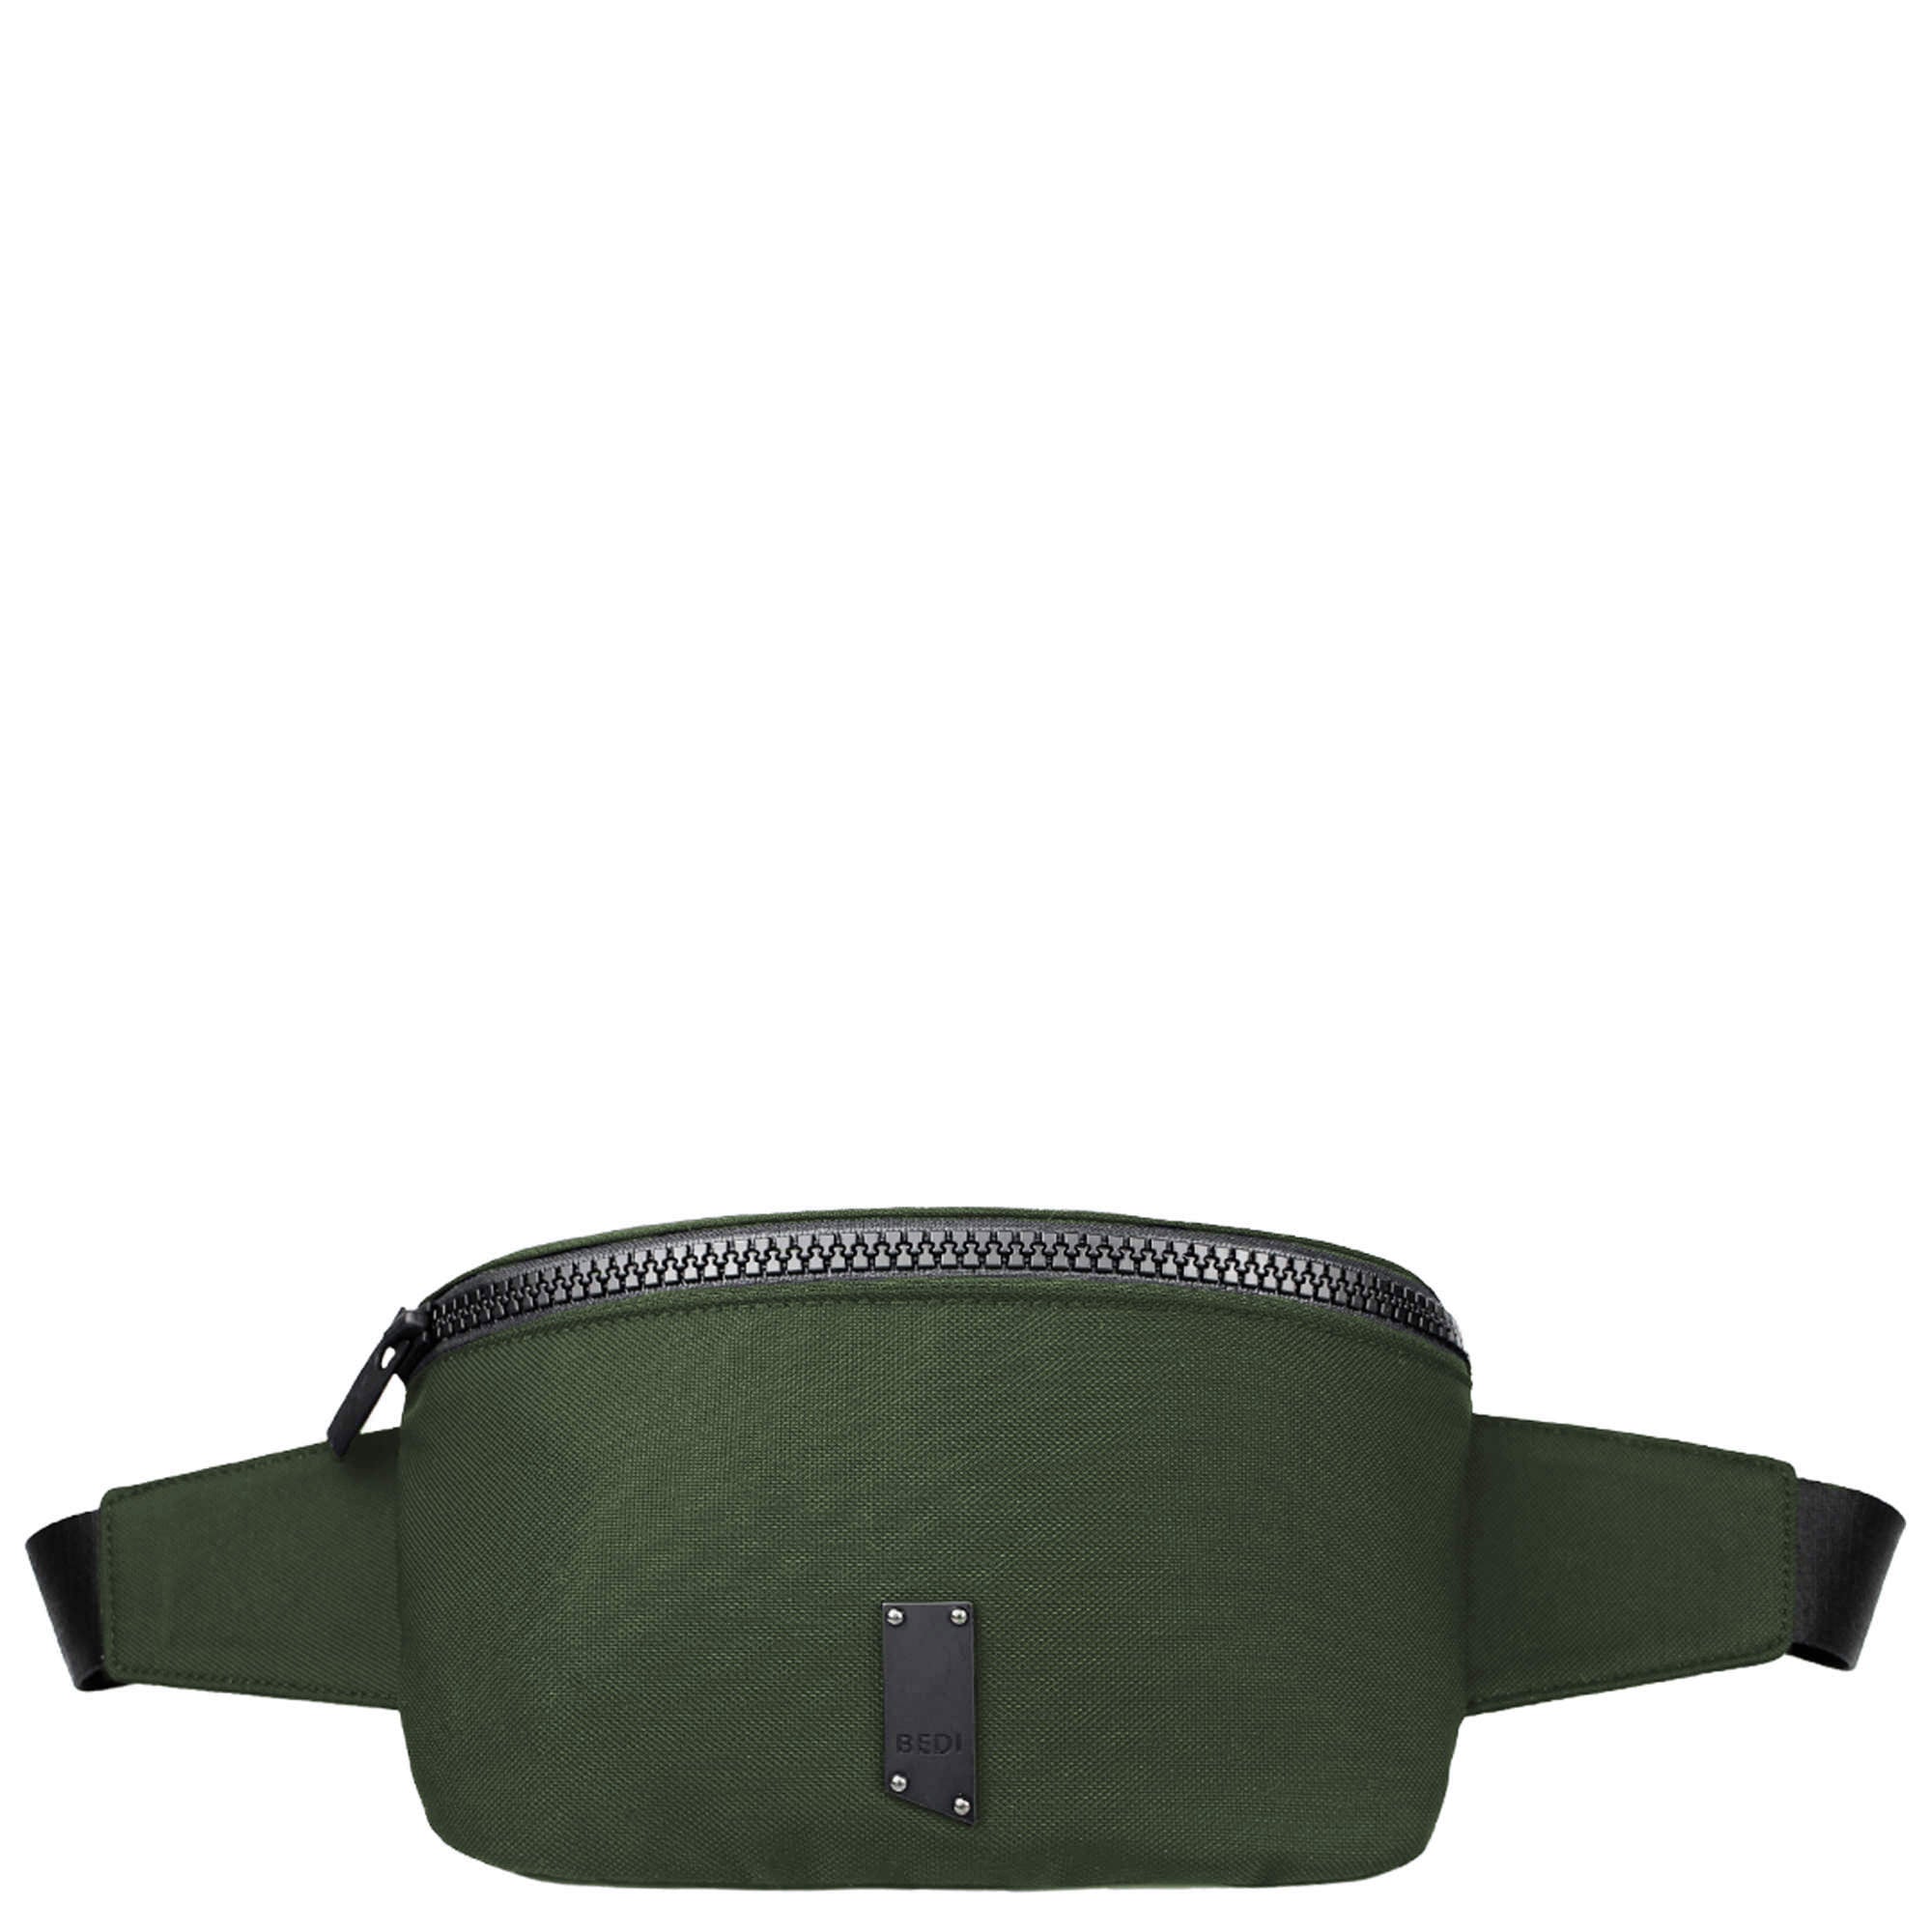 Sherpa fanny pack made with green econyl against a white background